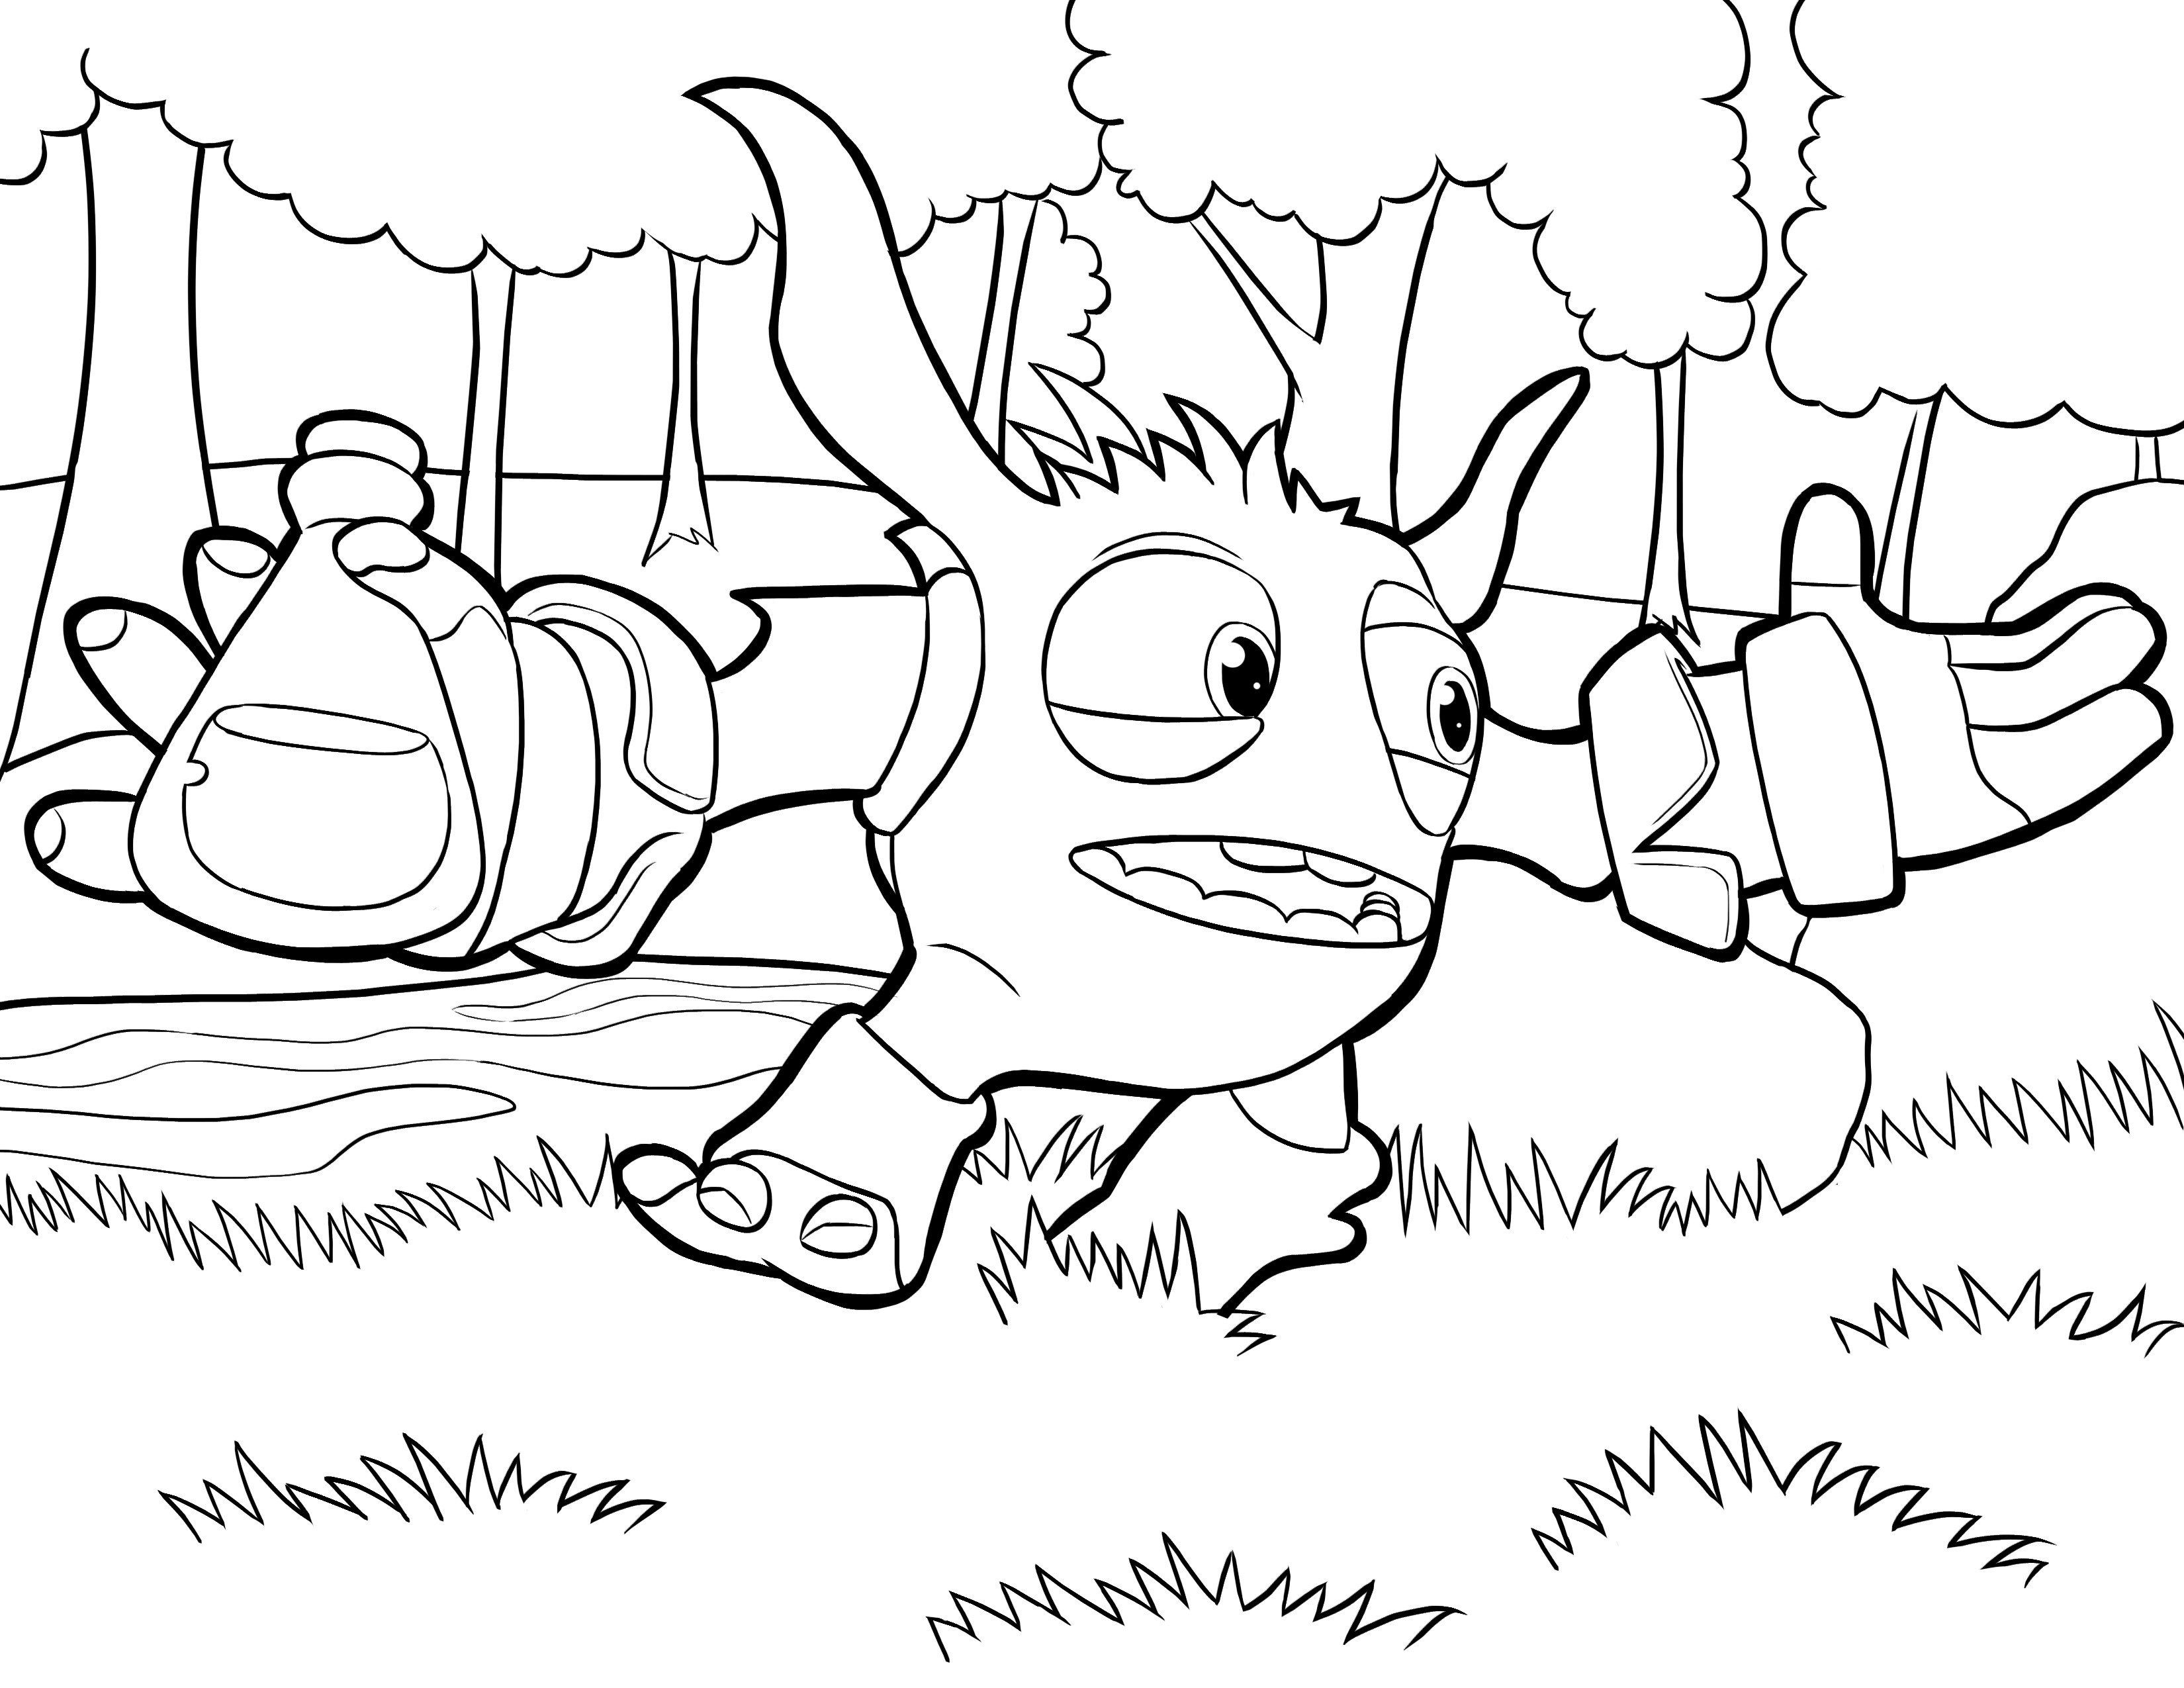 Terraria Coloring Pages Video Game | Coloring pages, Coloring ...